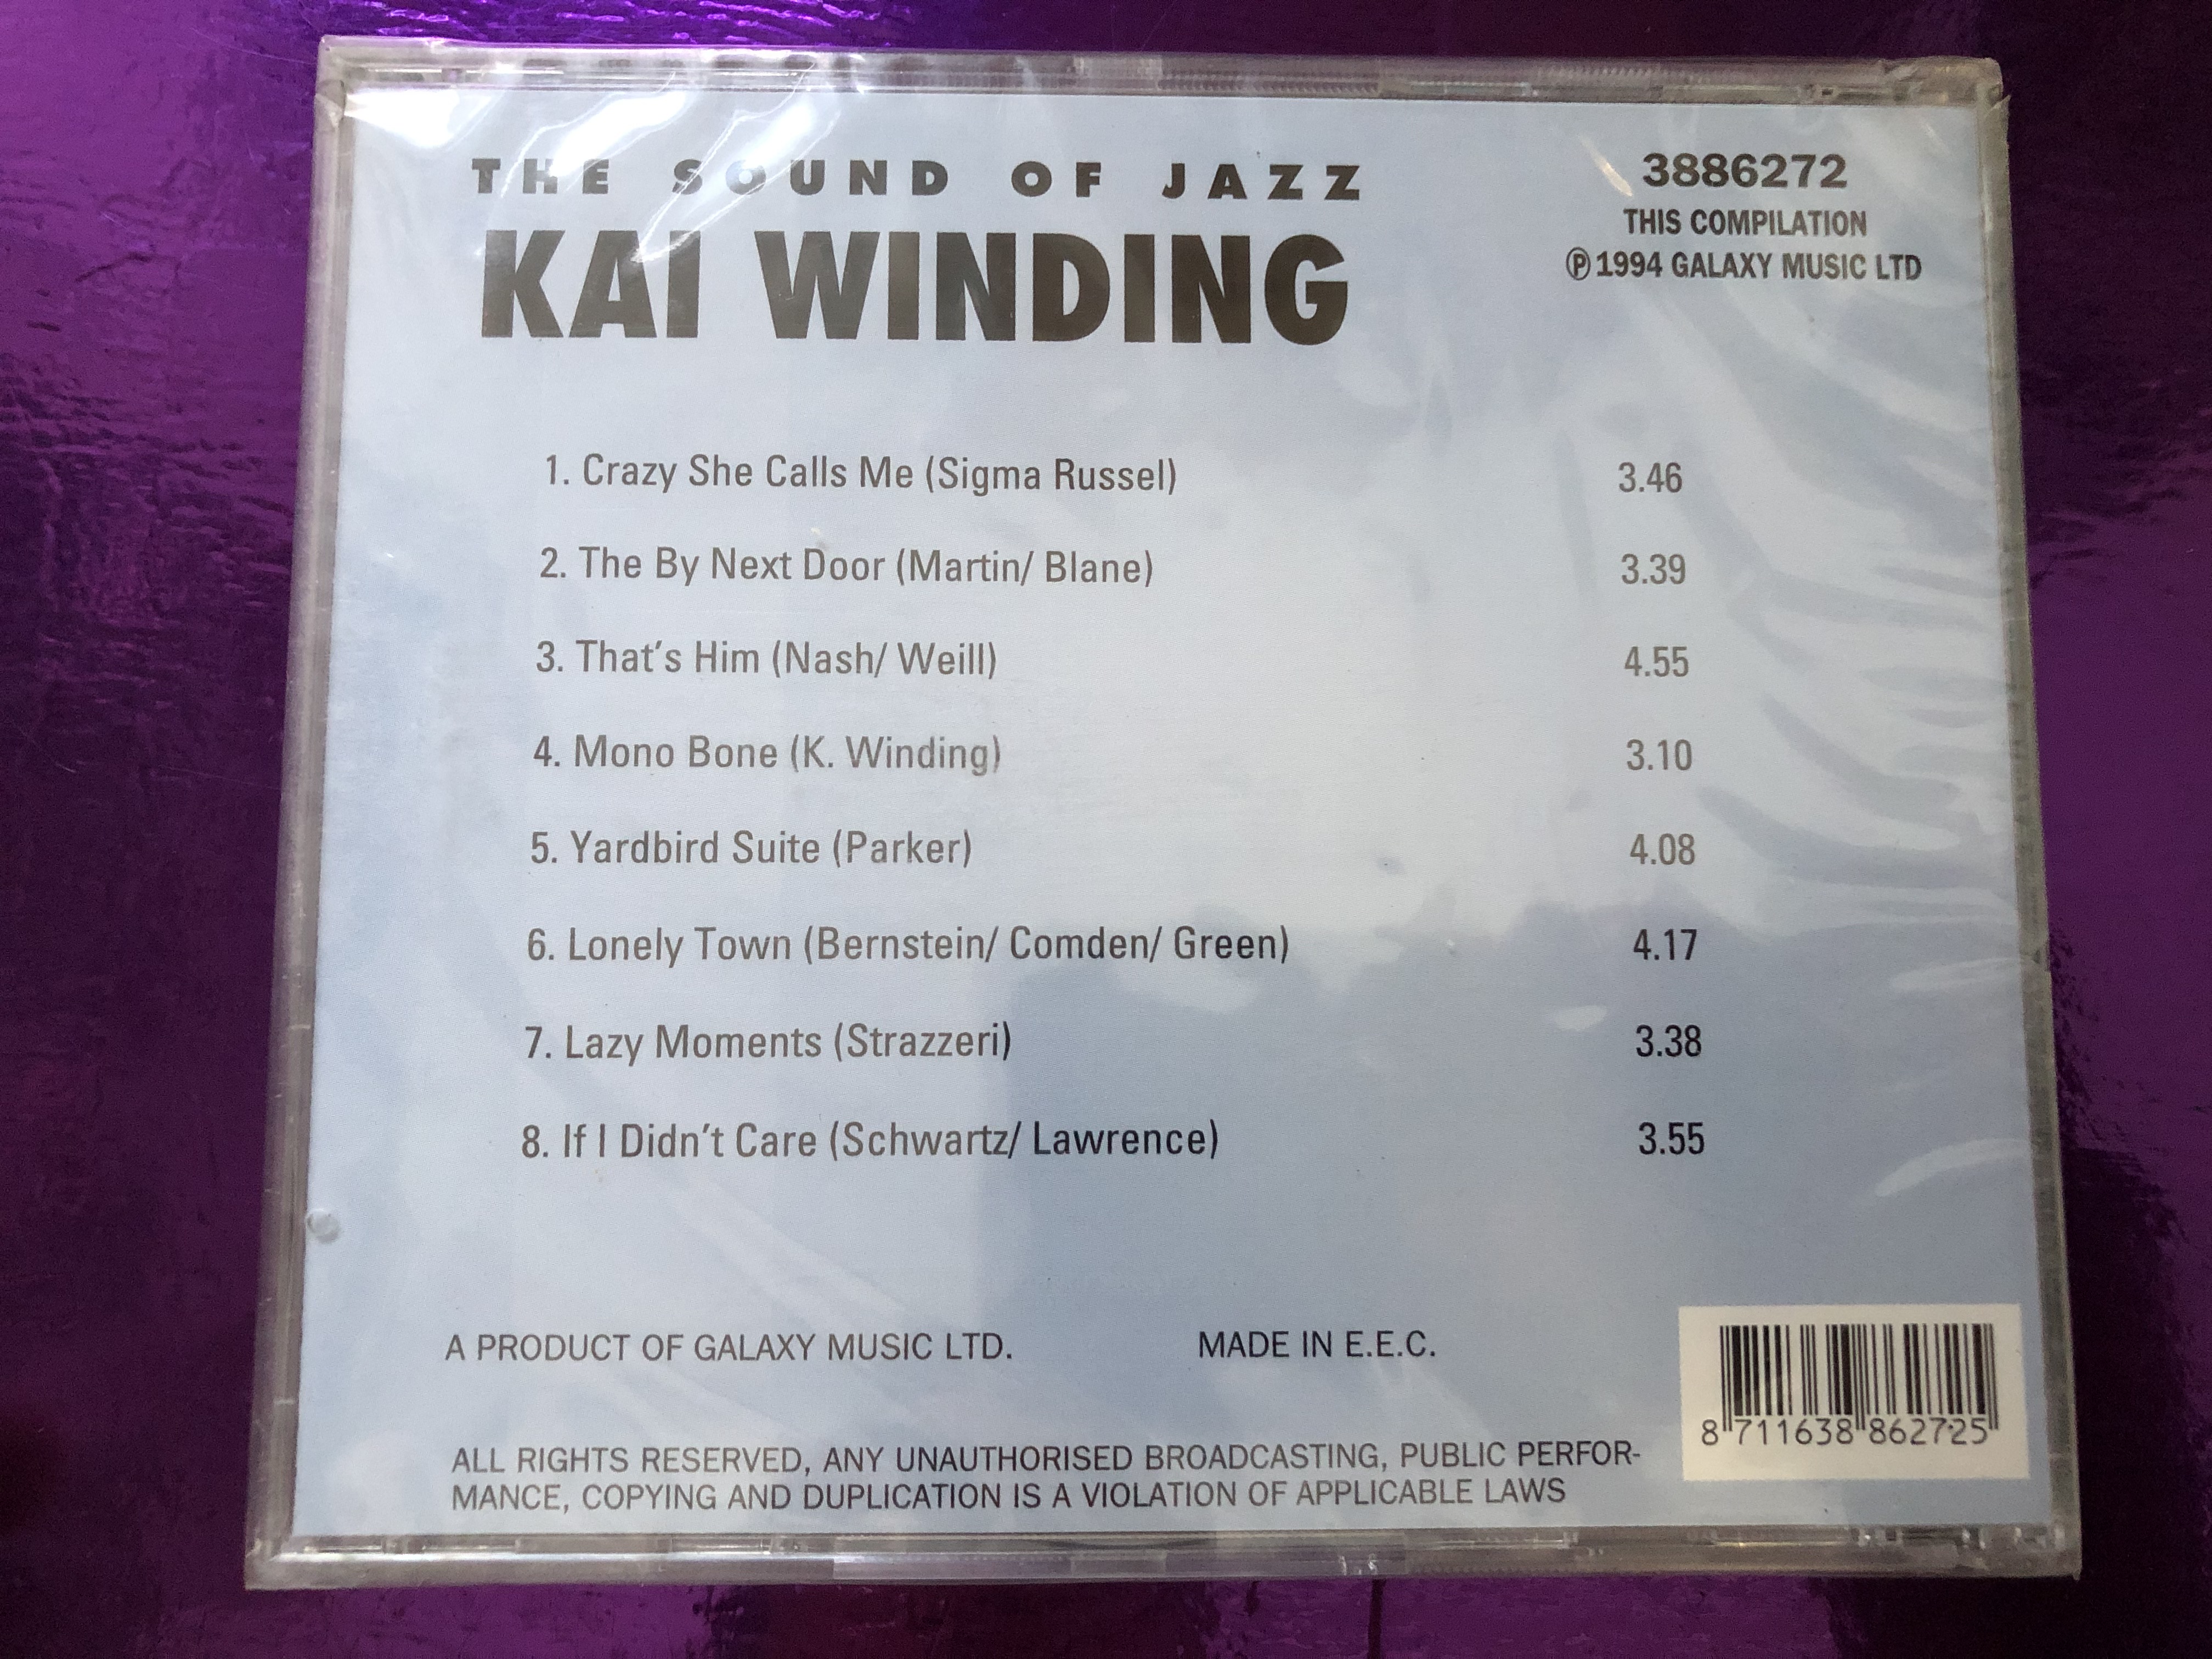 sound-of-jazz-kai-winding-vol.-27-crazy-she-calls-me-the-boy-next-door-that-s-him-mono-bone-yardbird-suite-lonely-town-lazy-moments-if-i-didn-t-care-galaxy-music-audio-cd-1994-38.jpg